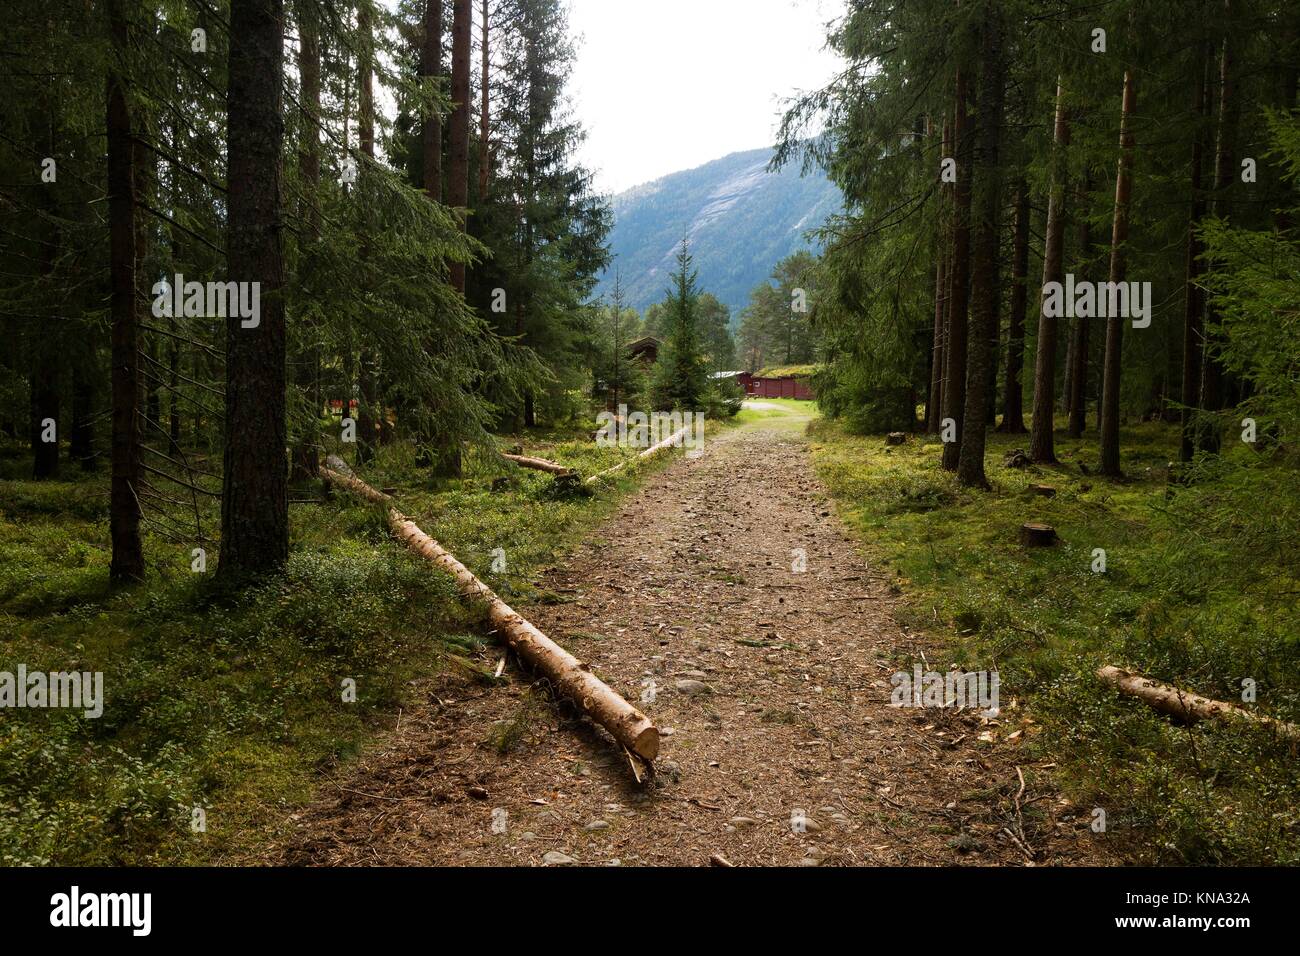 Walking path in the forest, Setesdal, Norway. Stock Photo